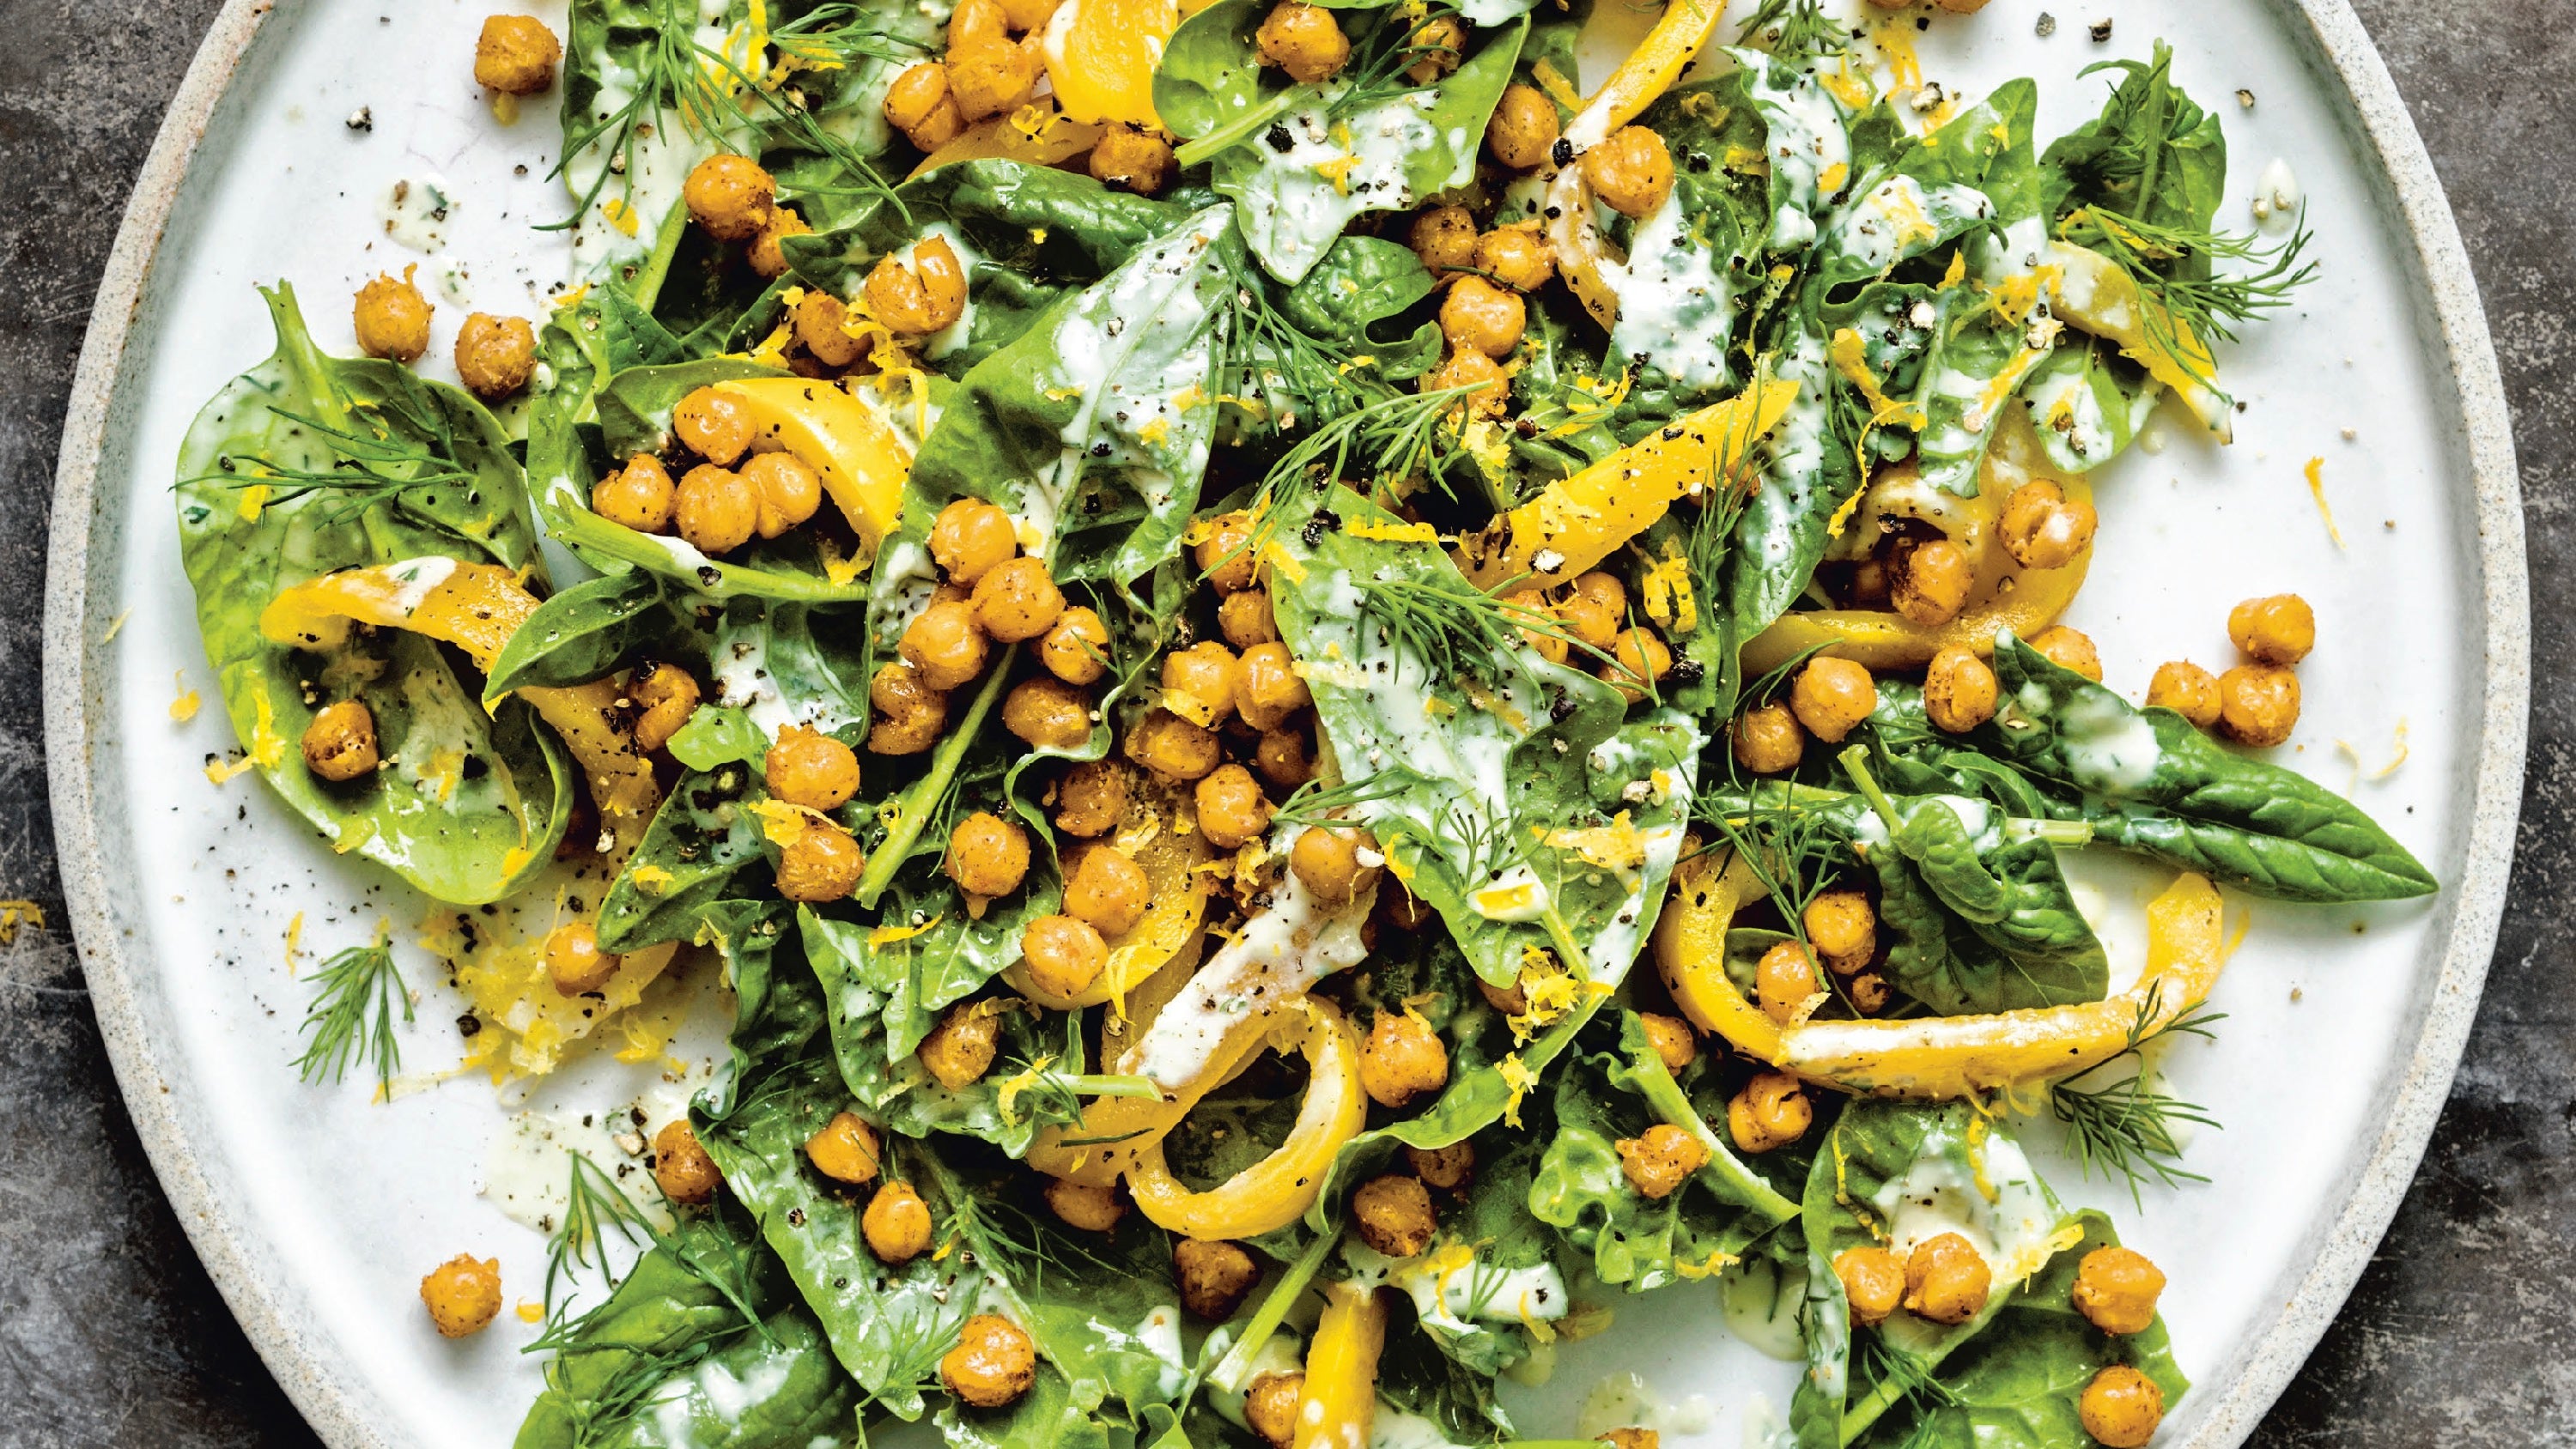 Spinach Salad with Blackened Chickpeas